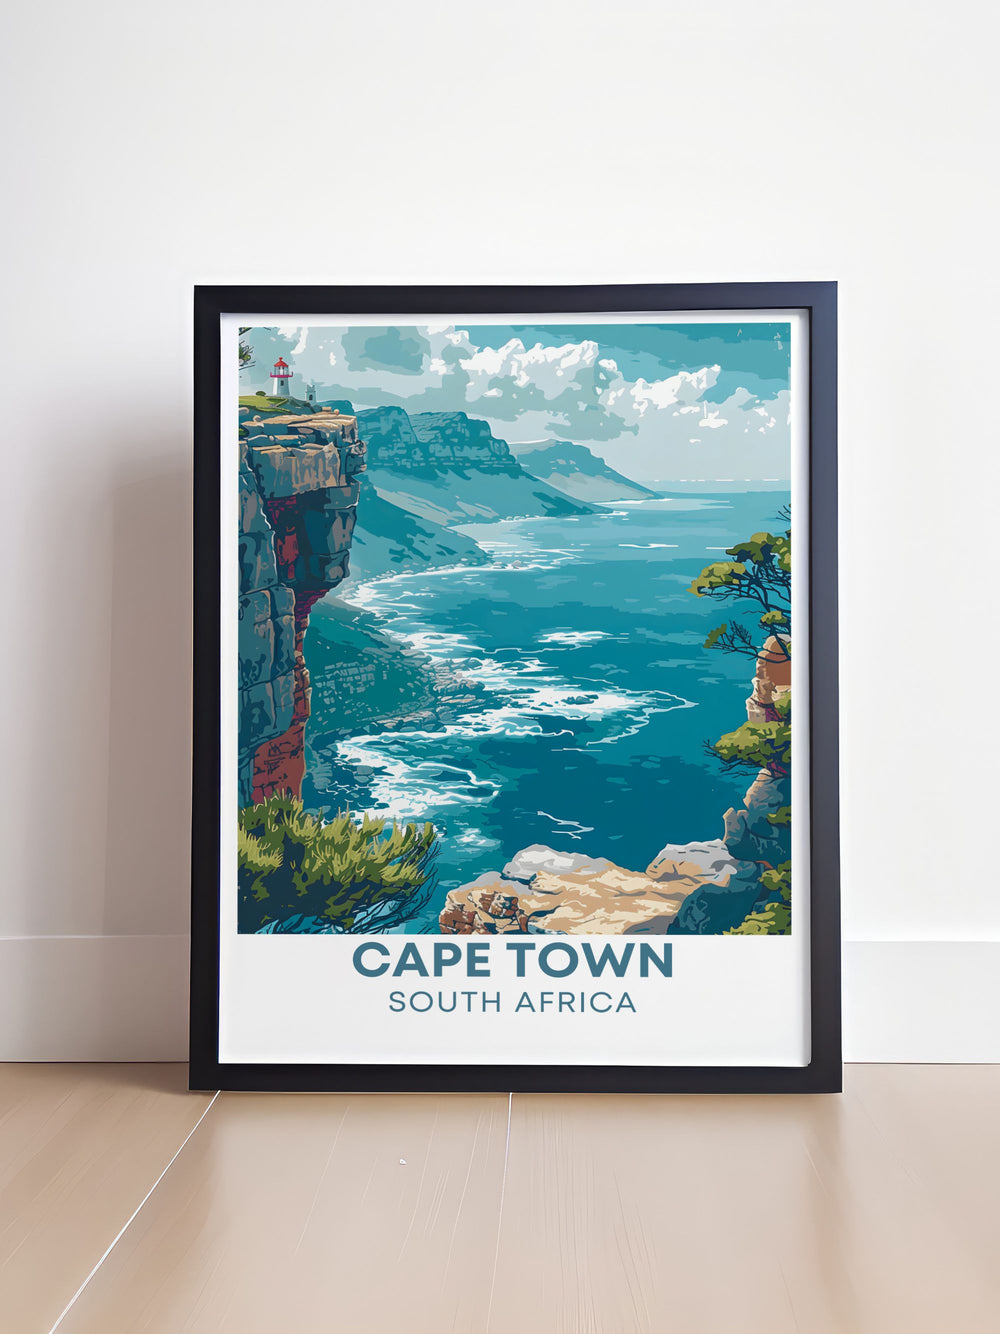 This poster artfully depicts Table Mountain and its role in Cape Towns skyline, offering a perfect blend of scenic landscapes and iconic landmarks for your decor.